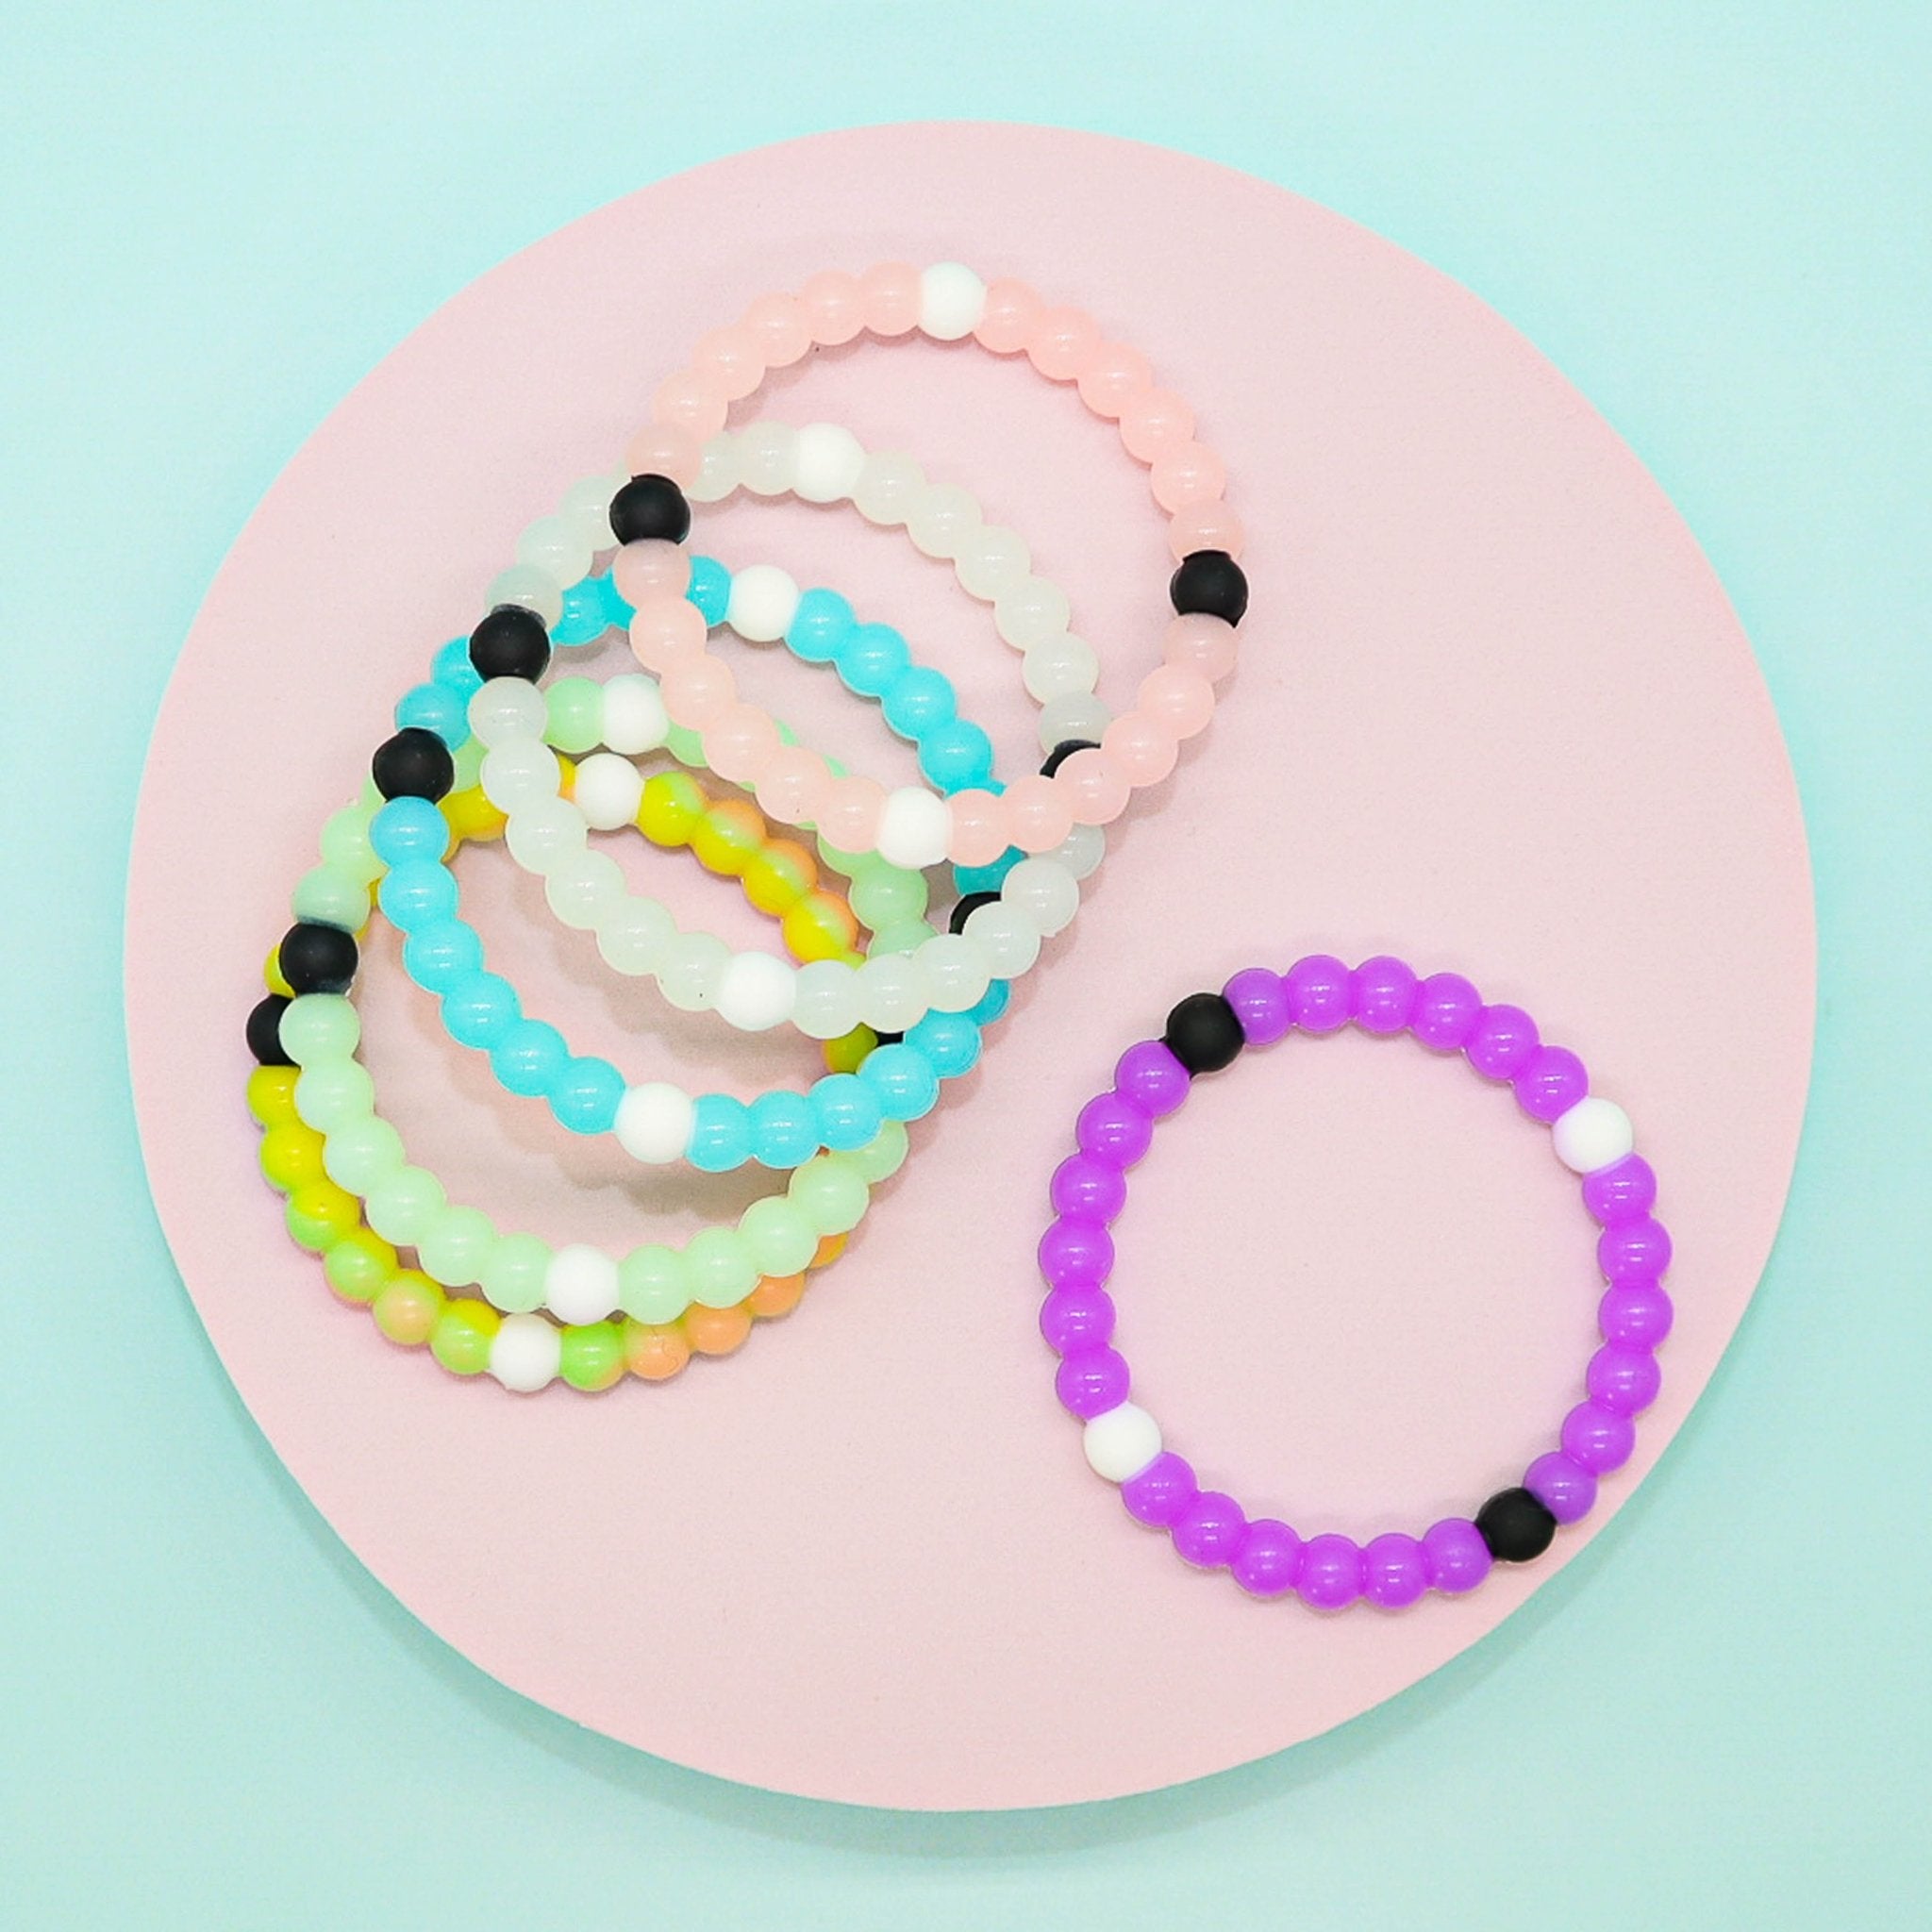 Kids Valentine's Day Gift Idea - Personalized Beaded Bracelets! - Making  Things is Awesome